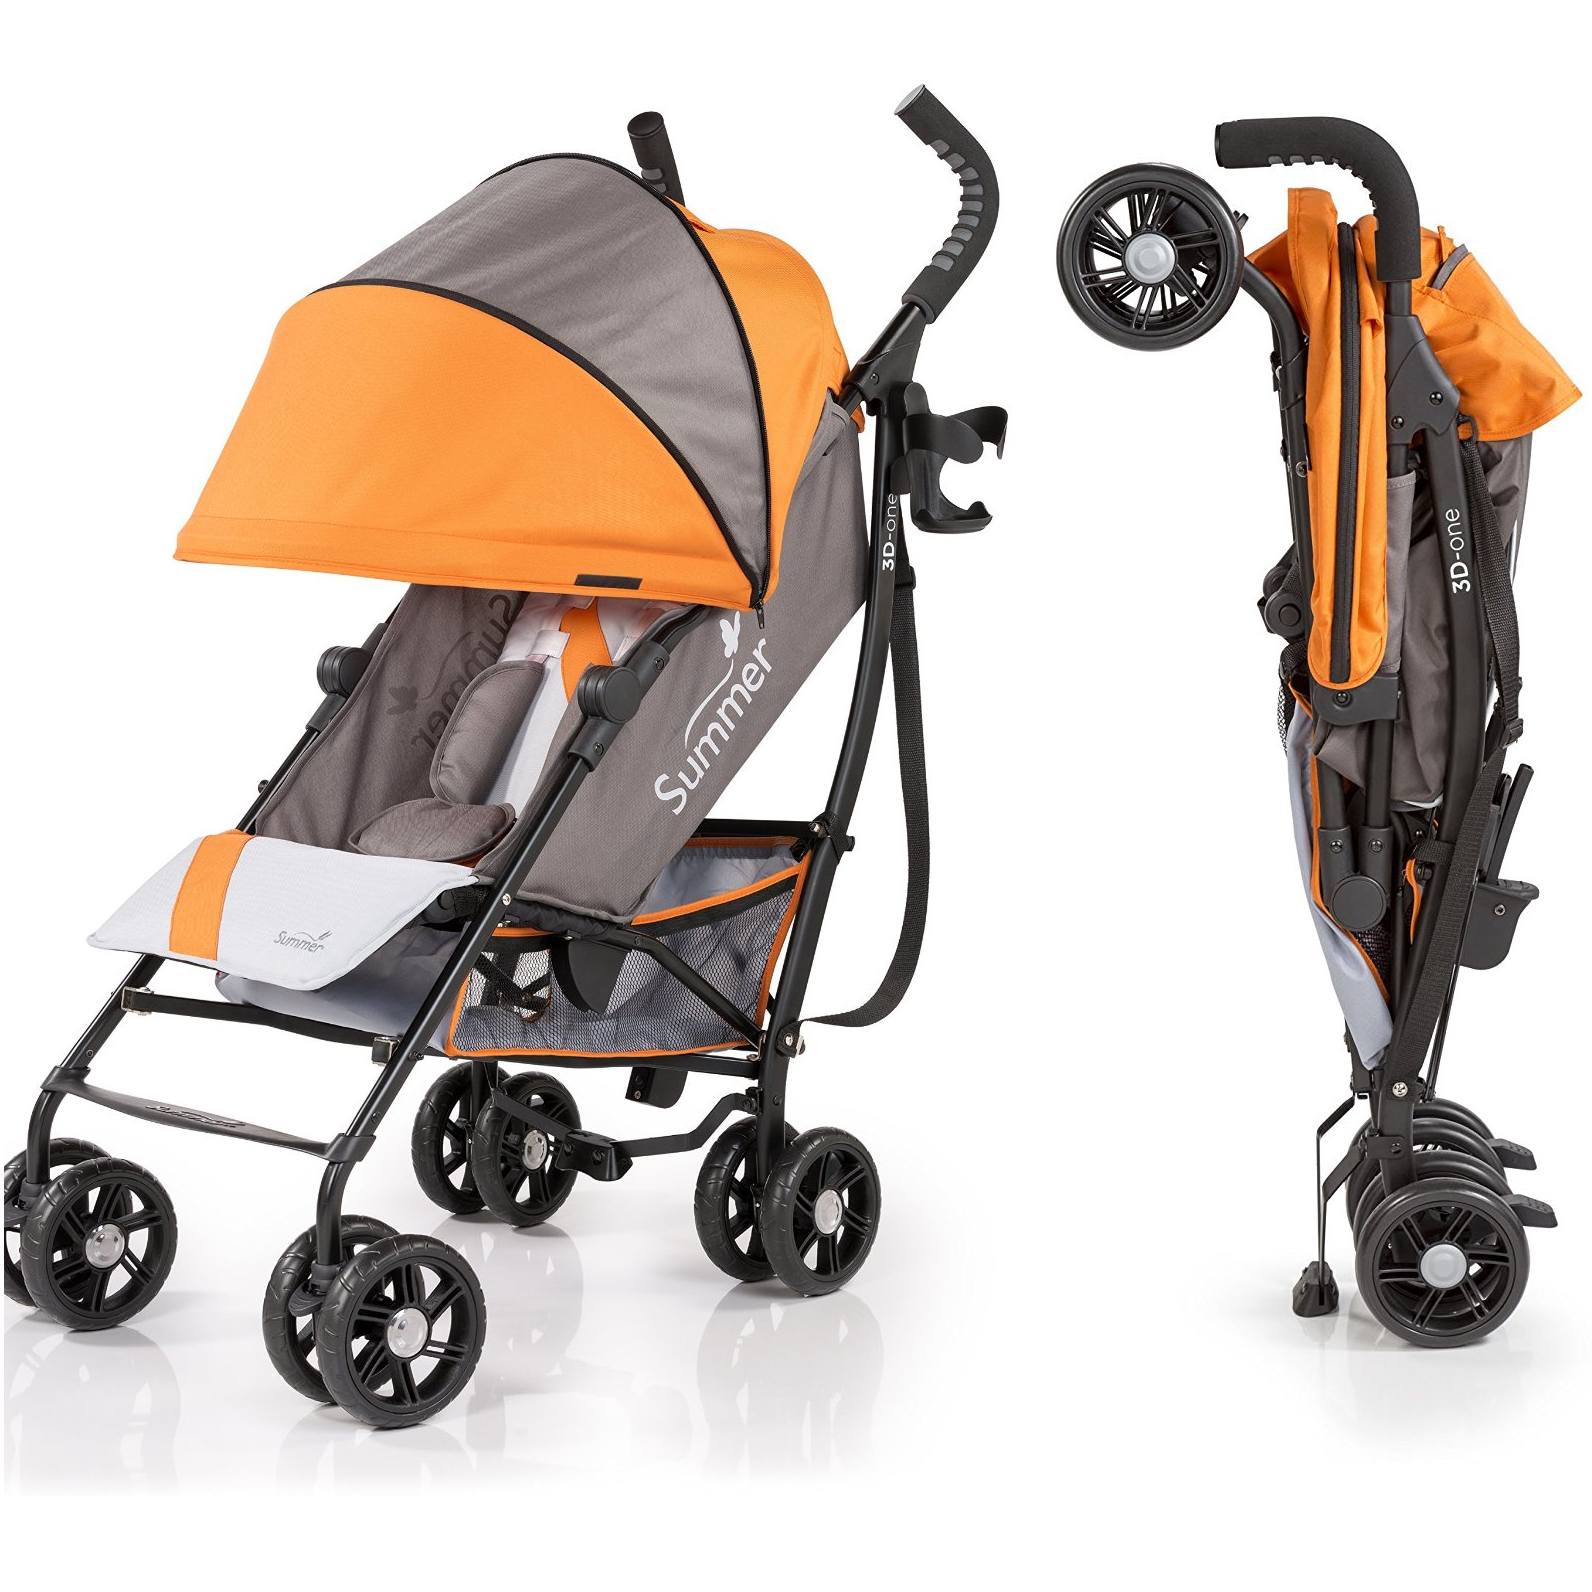 Summer Infant 3D-one Convenience Stroller $99.99 Shipped!